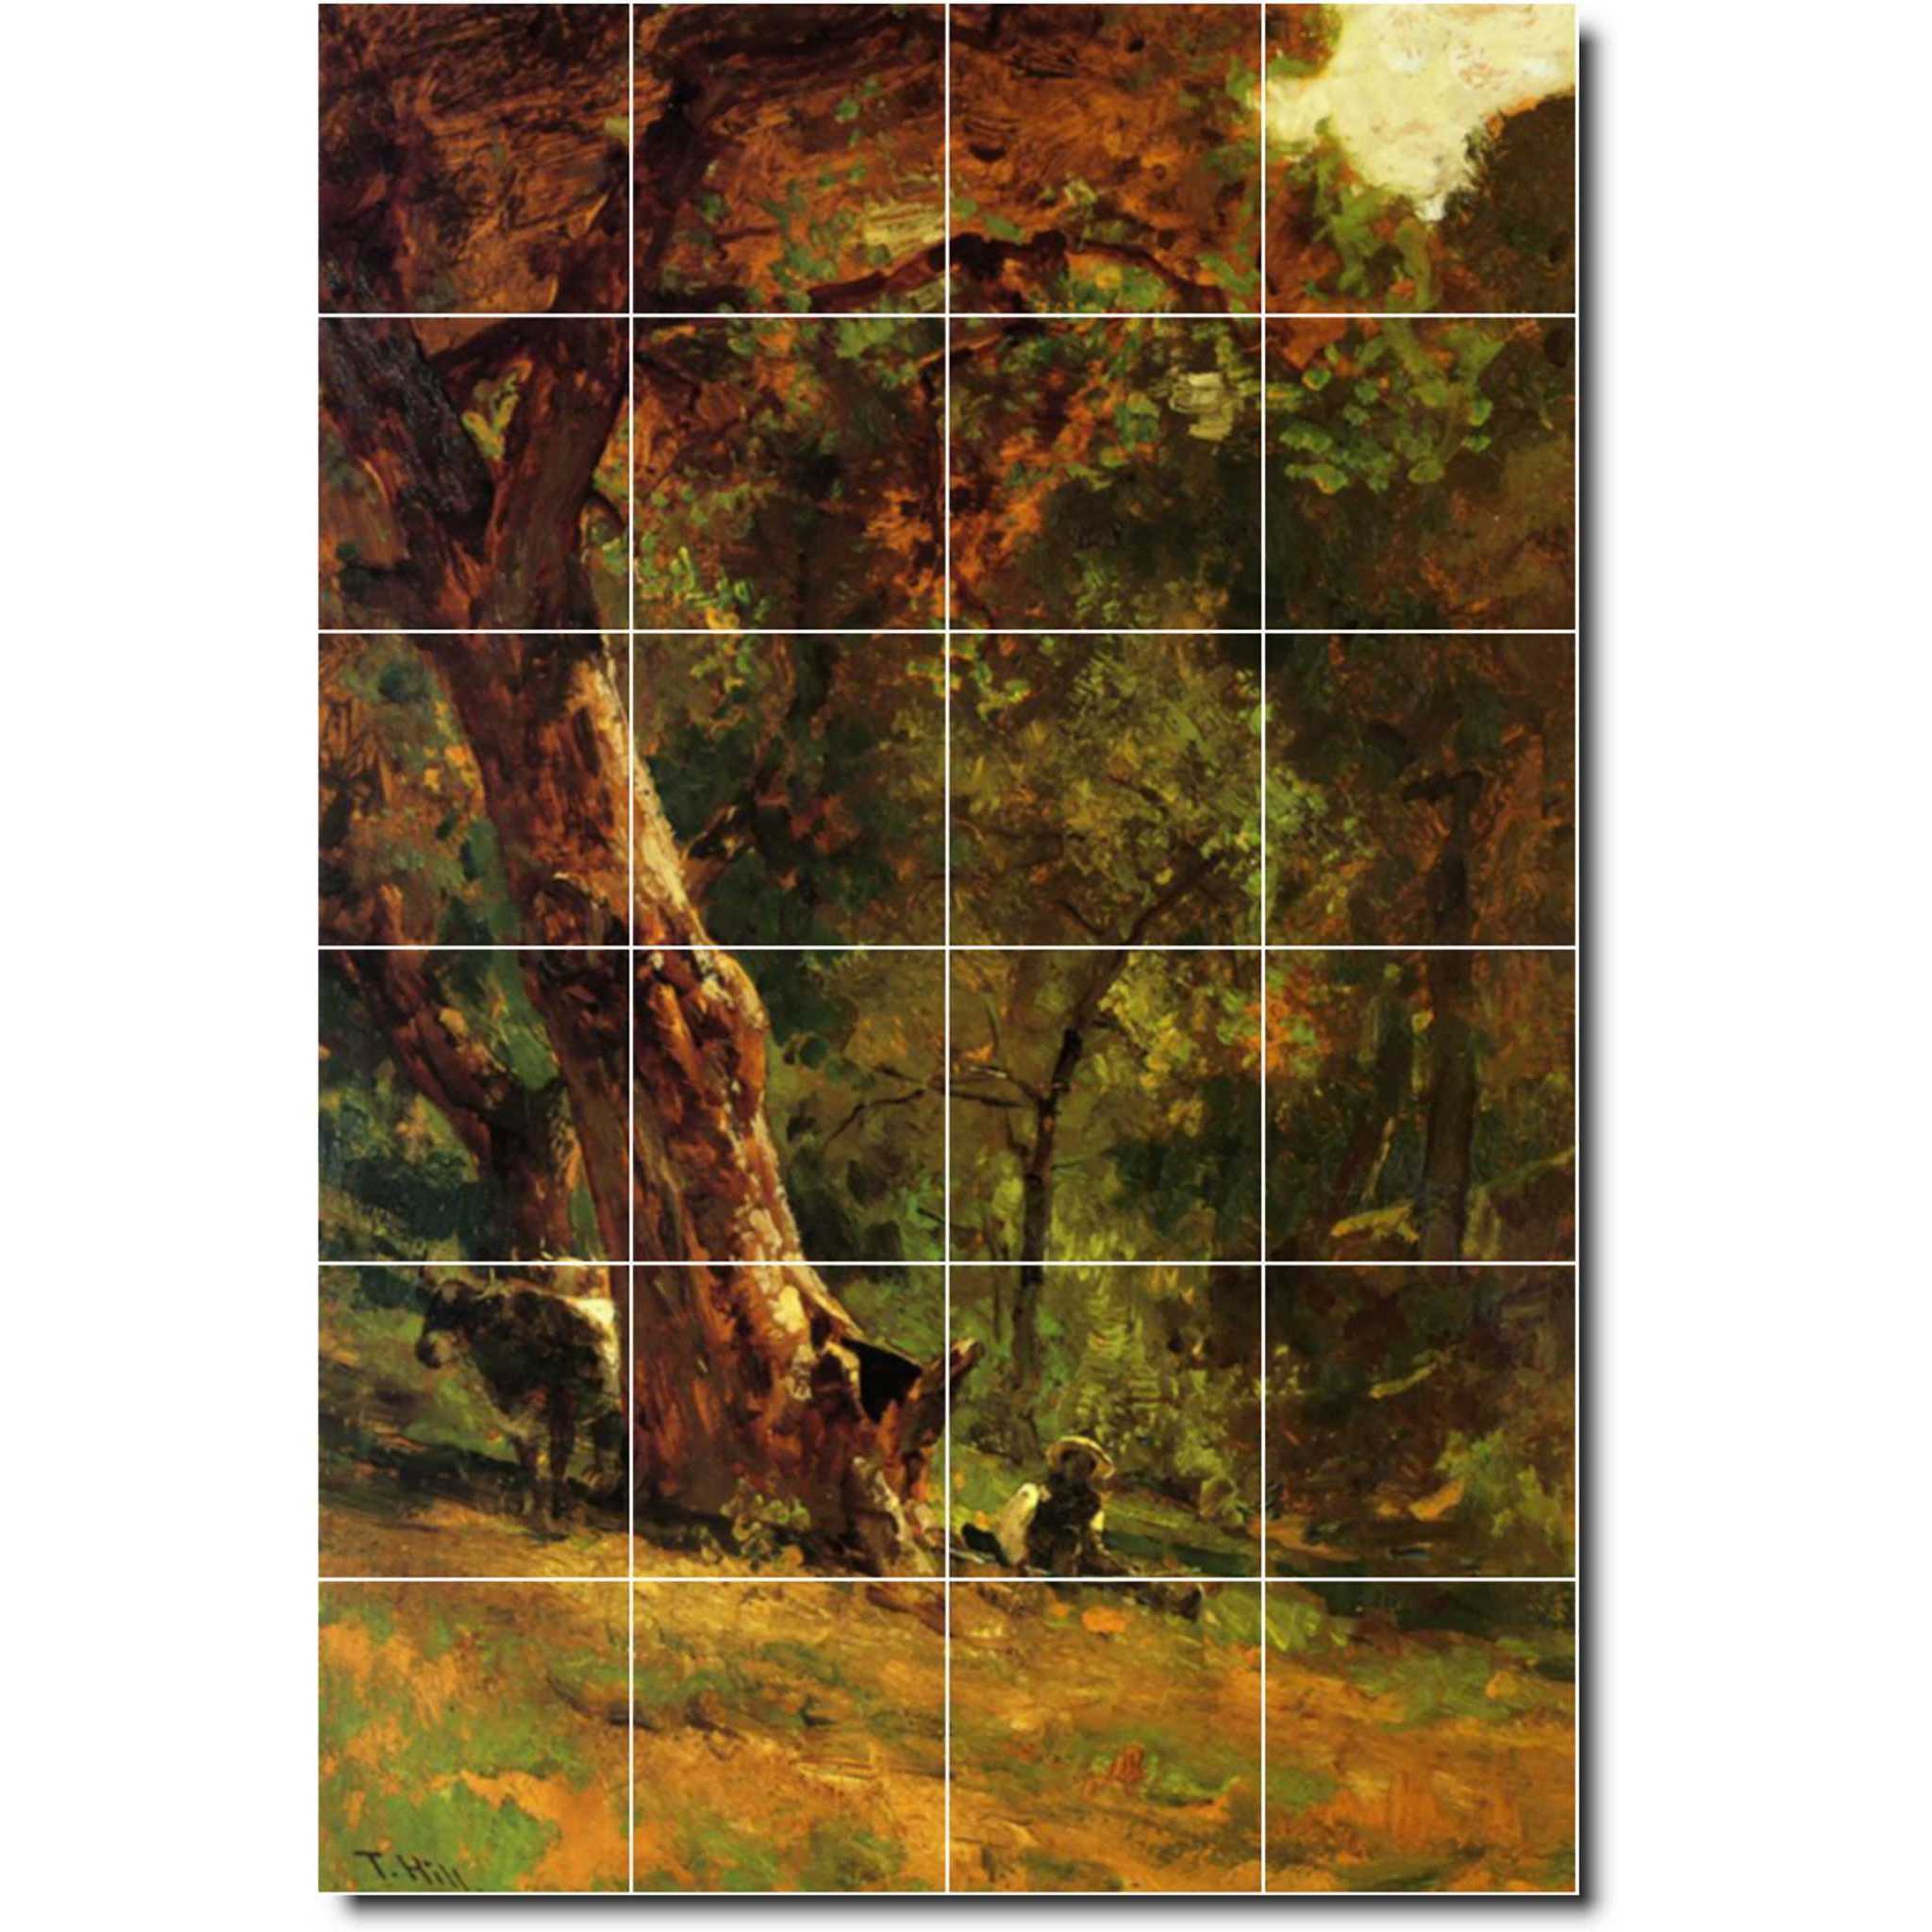 thomas hill country painting ceramic tile mural p04277